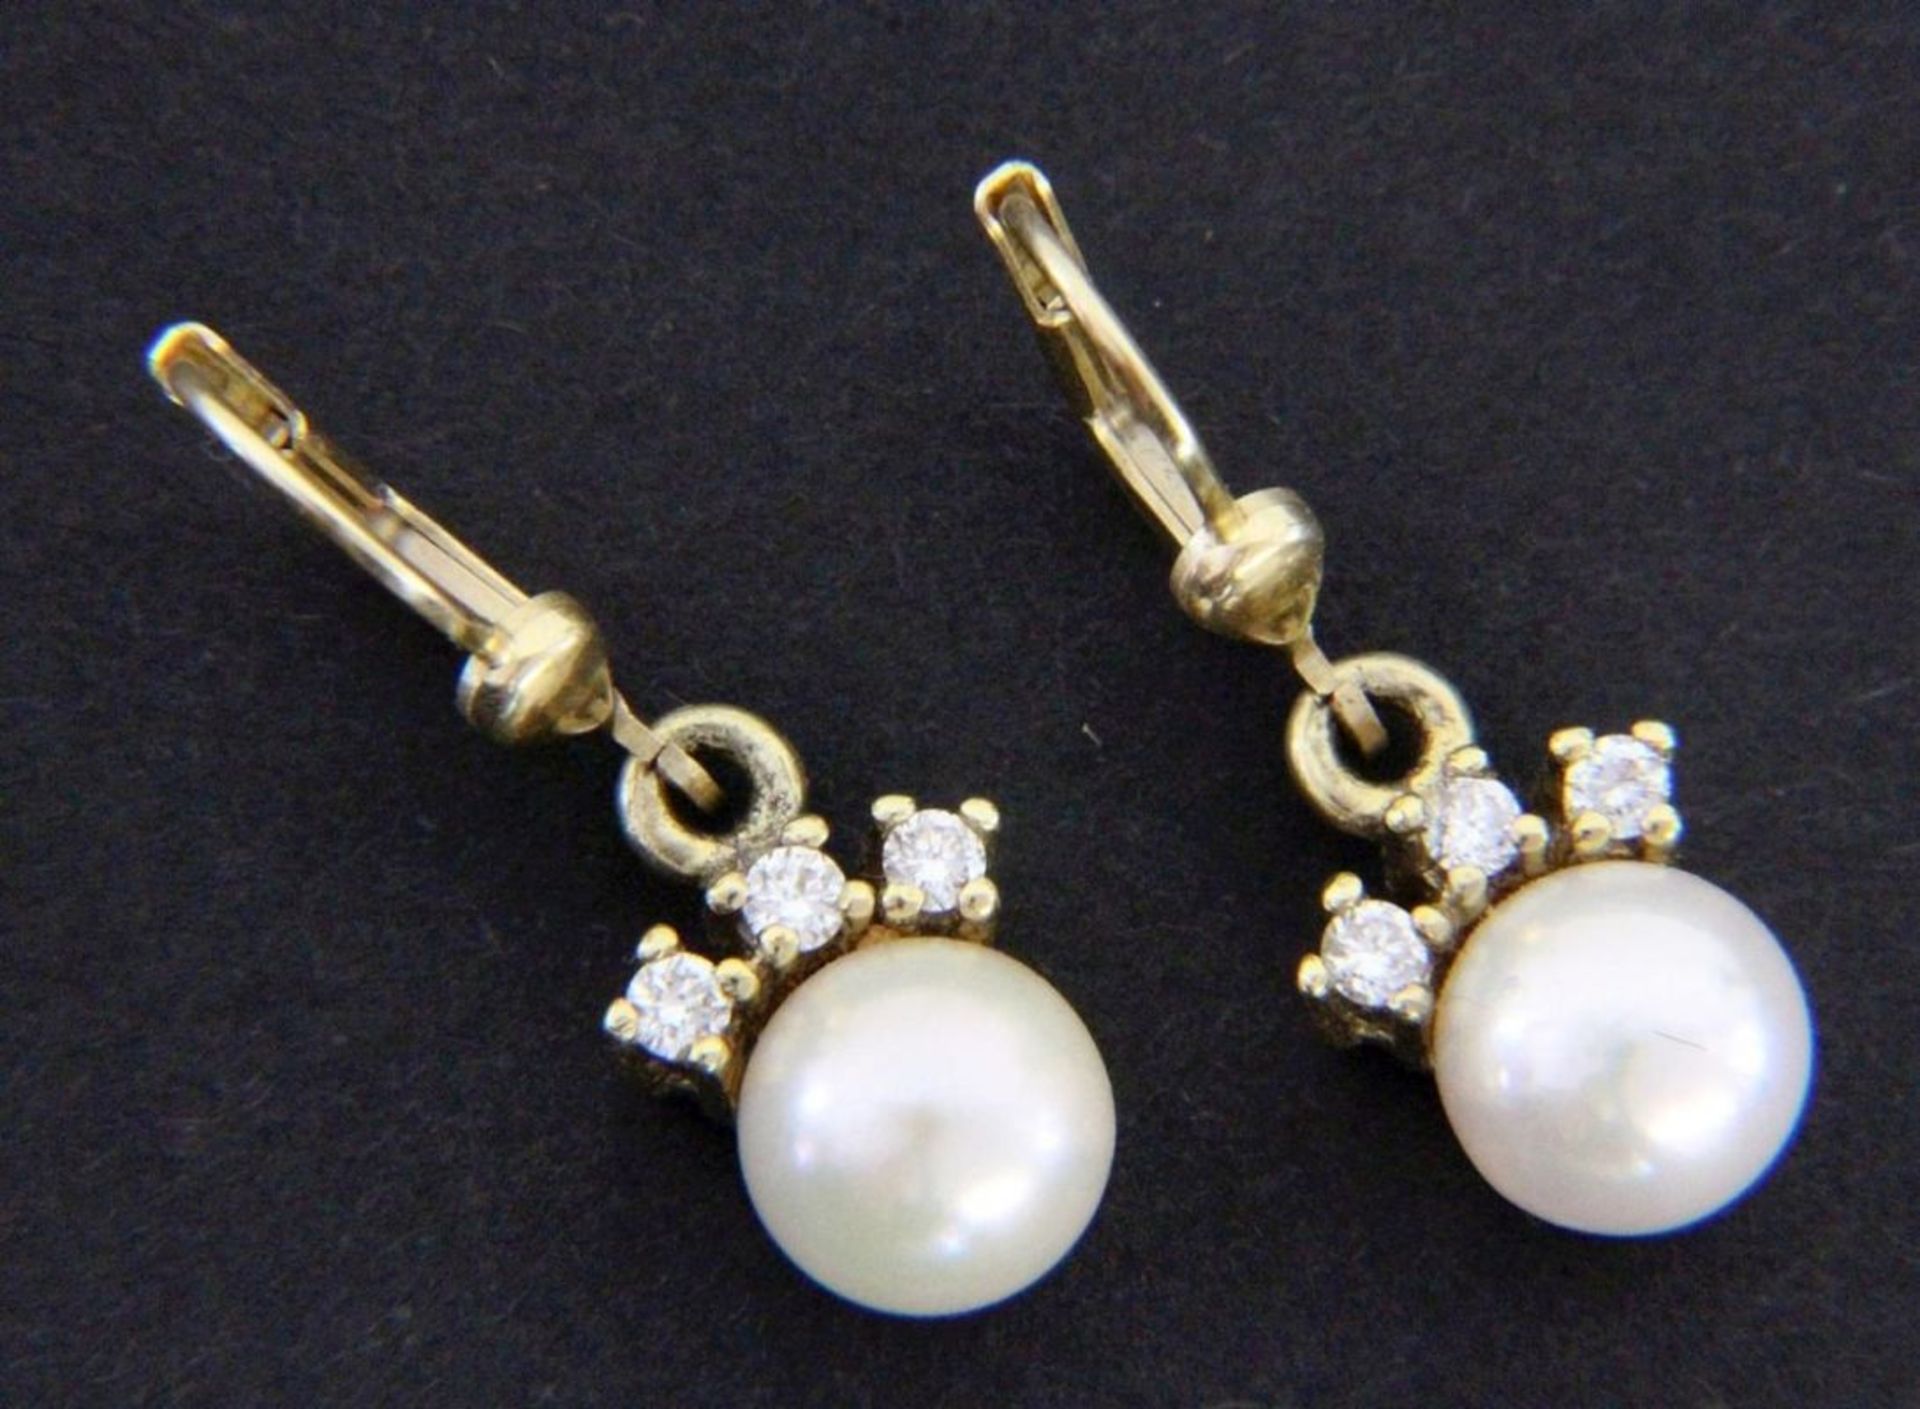 A PAIR OF DROP EARRINGS WITH PEARLS 585/000 yellow gold with cultured pearls measuring approx. 7